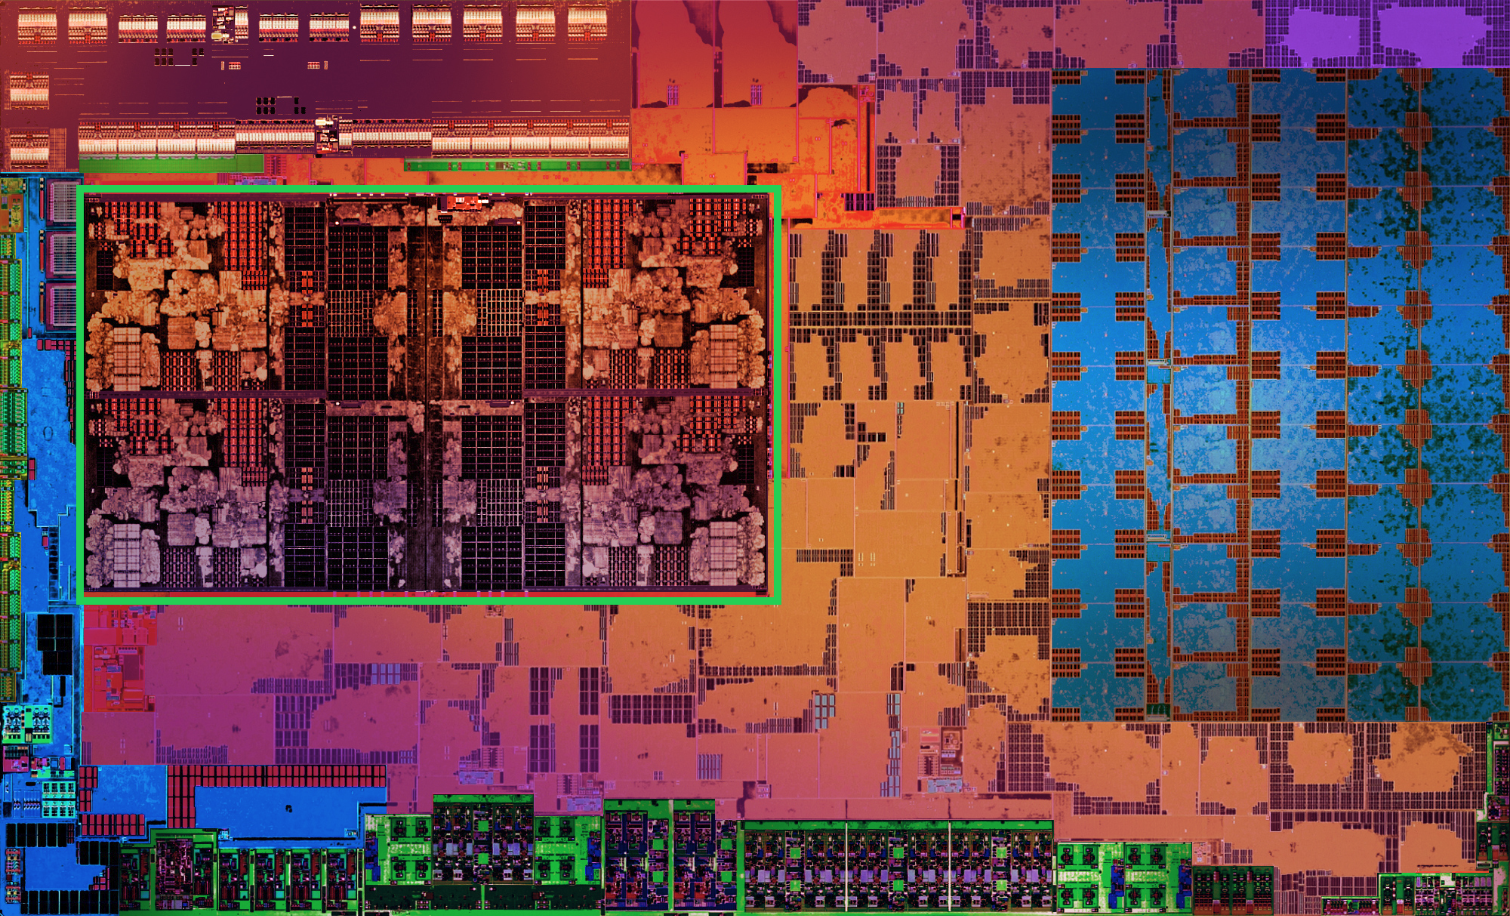 How We Tested AMD's Ryzen 5 2400G